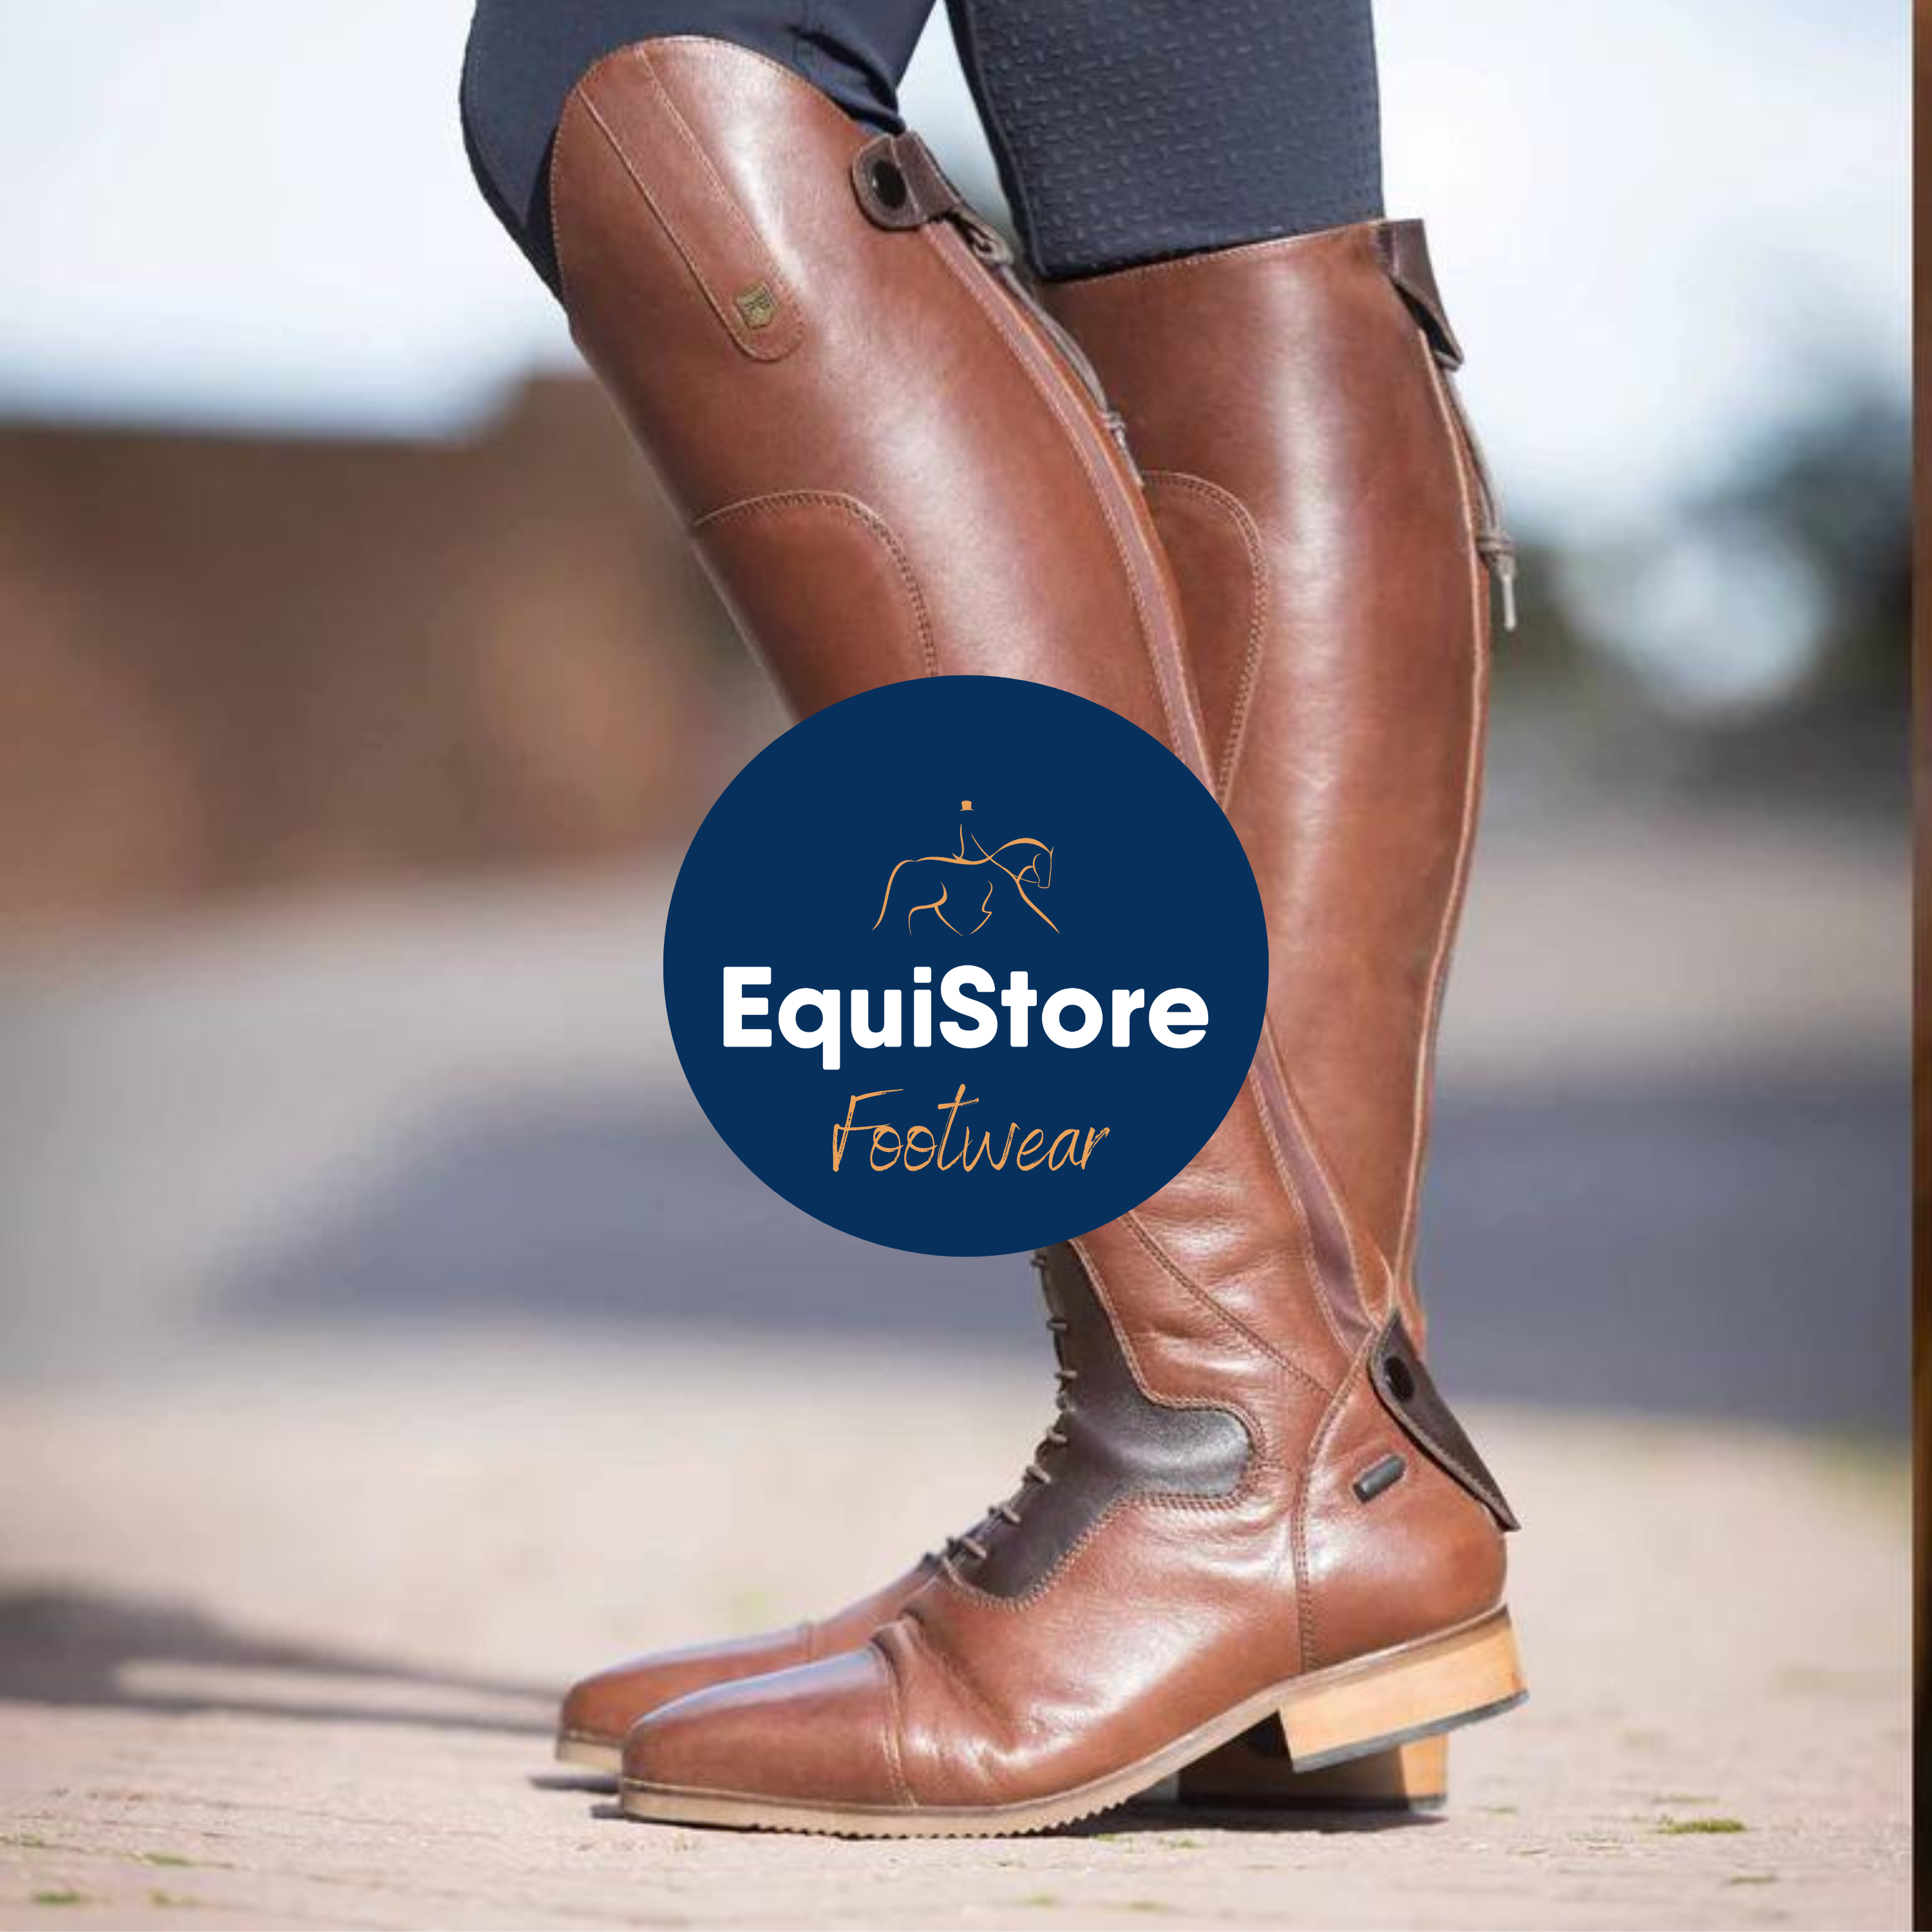 Horse riding boots and equestrian footwear available in Ireland at EquiStore